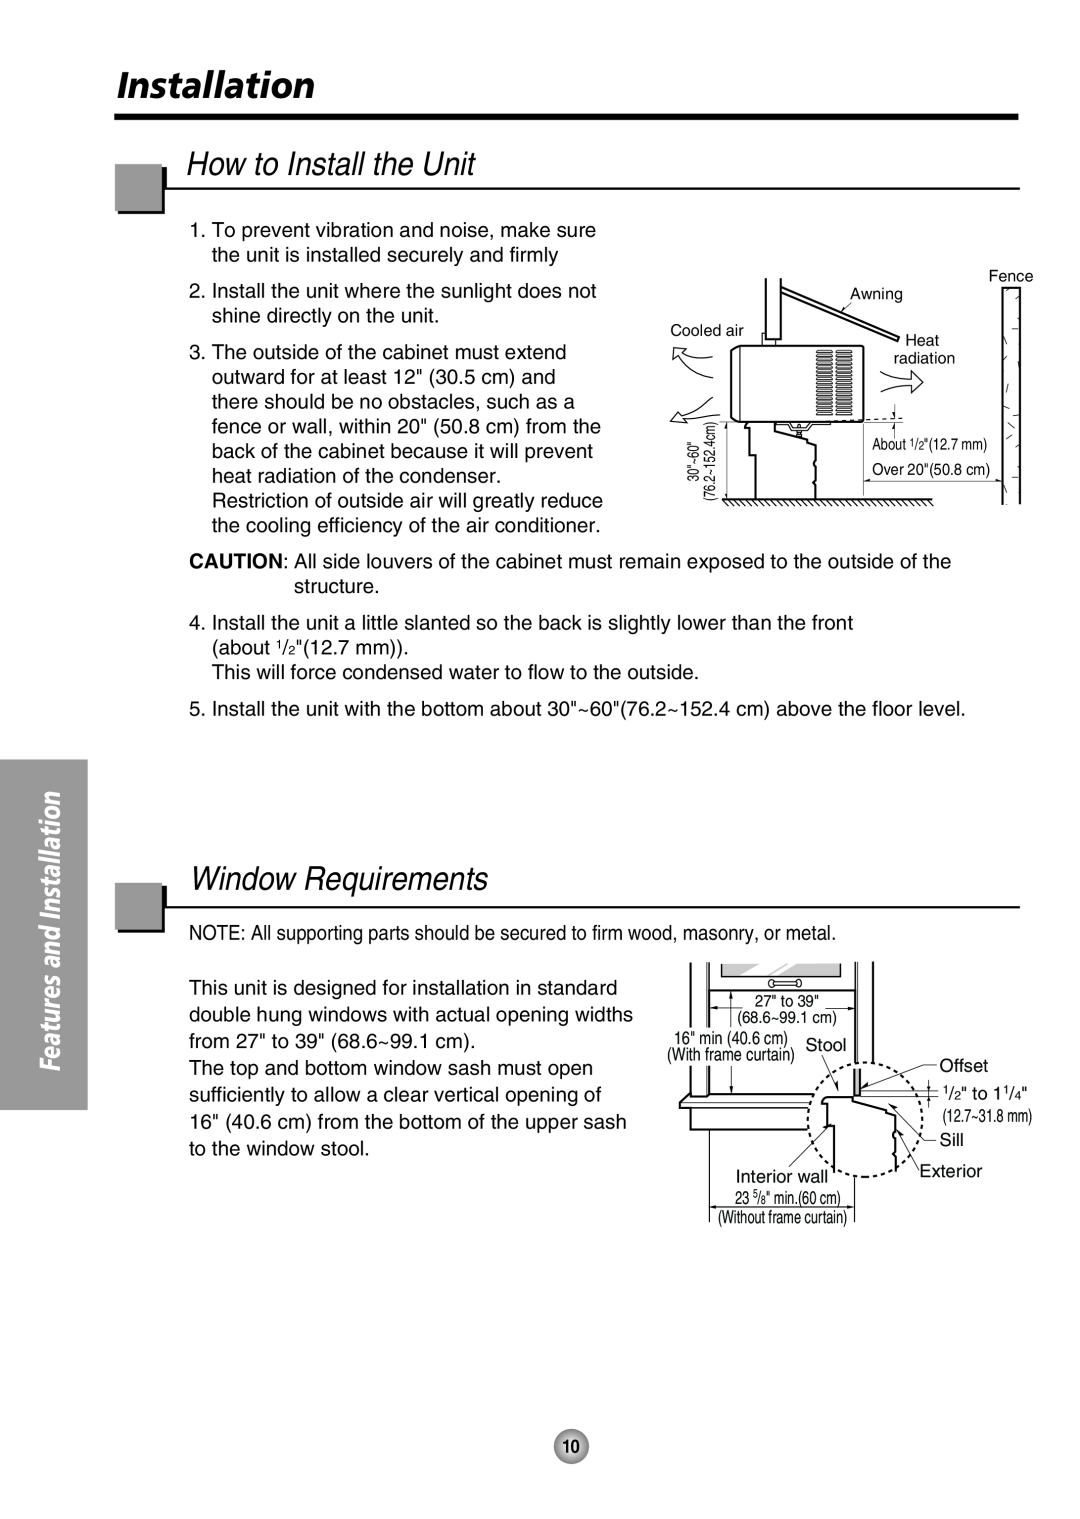 Panasonic CW-XC105HU, CW-XC125HU How to Install the Unit, Window Requirements, and Installation, Features 